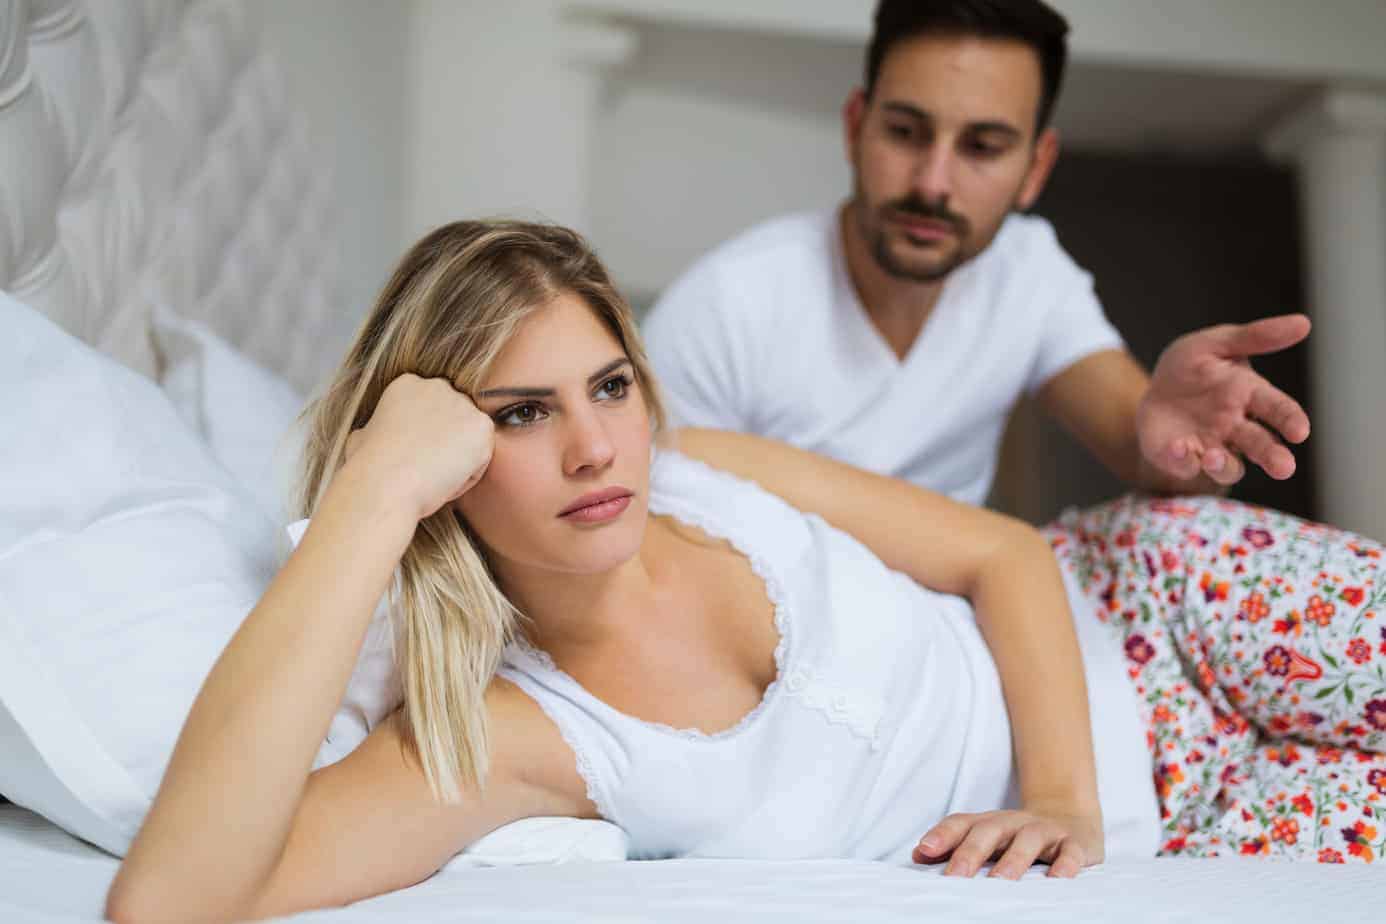 Signs husband not interested